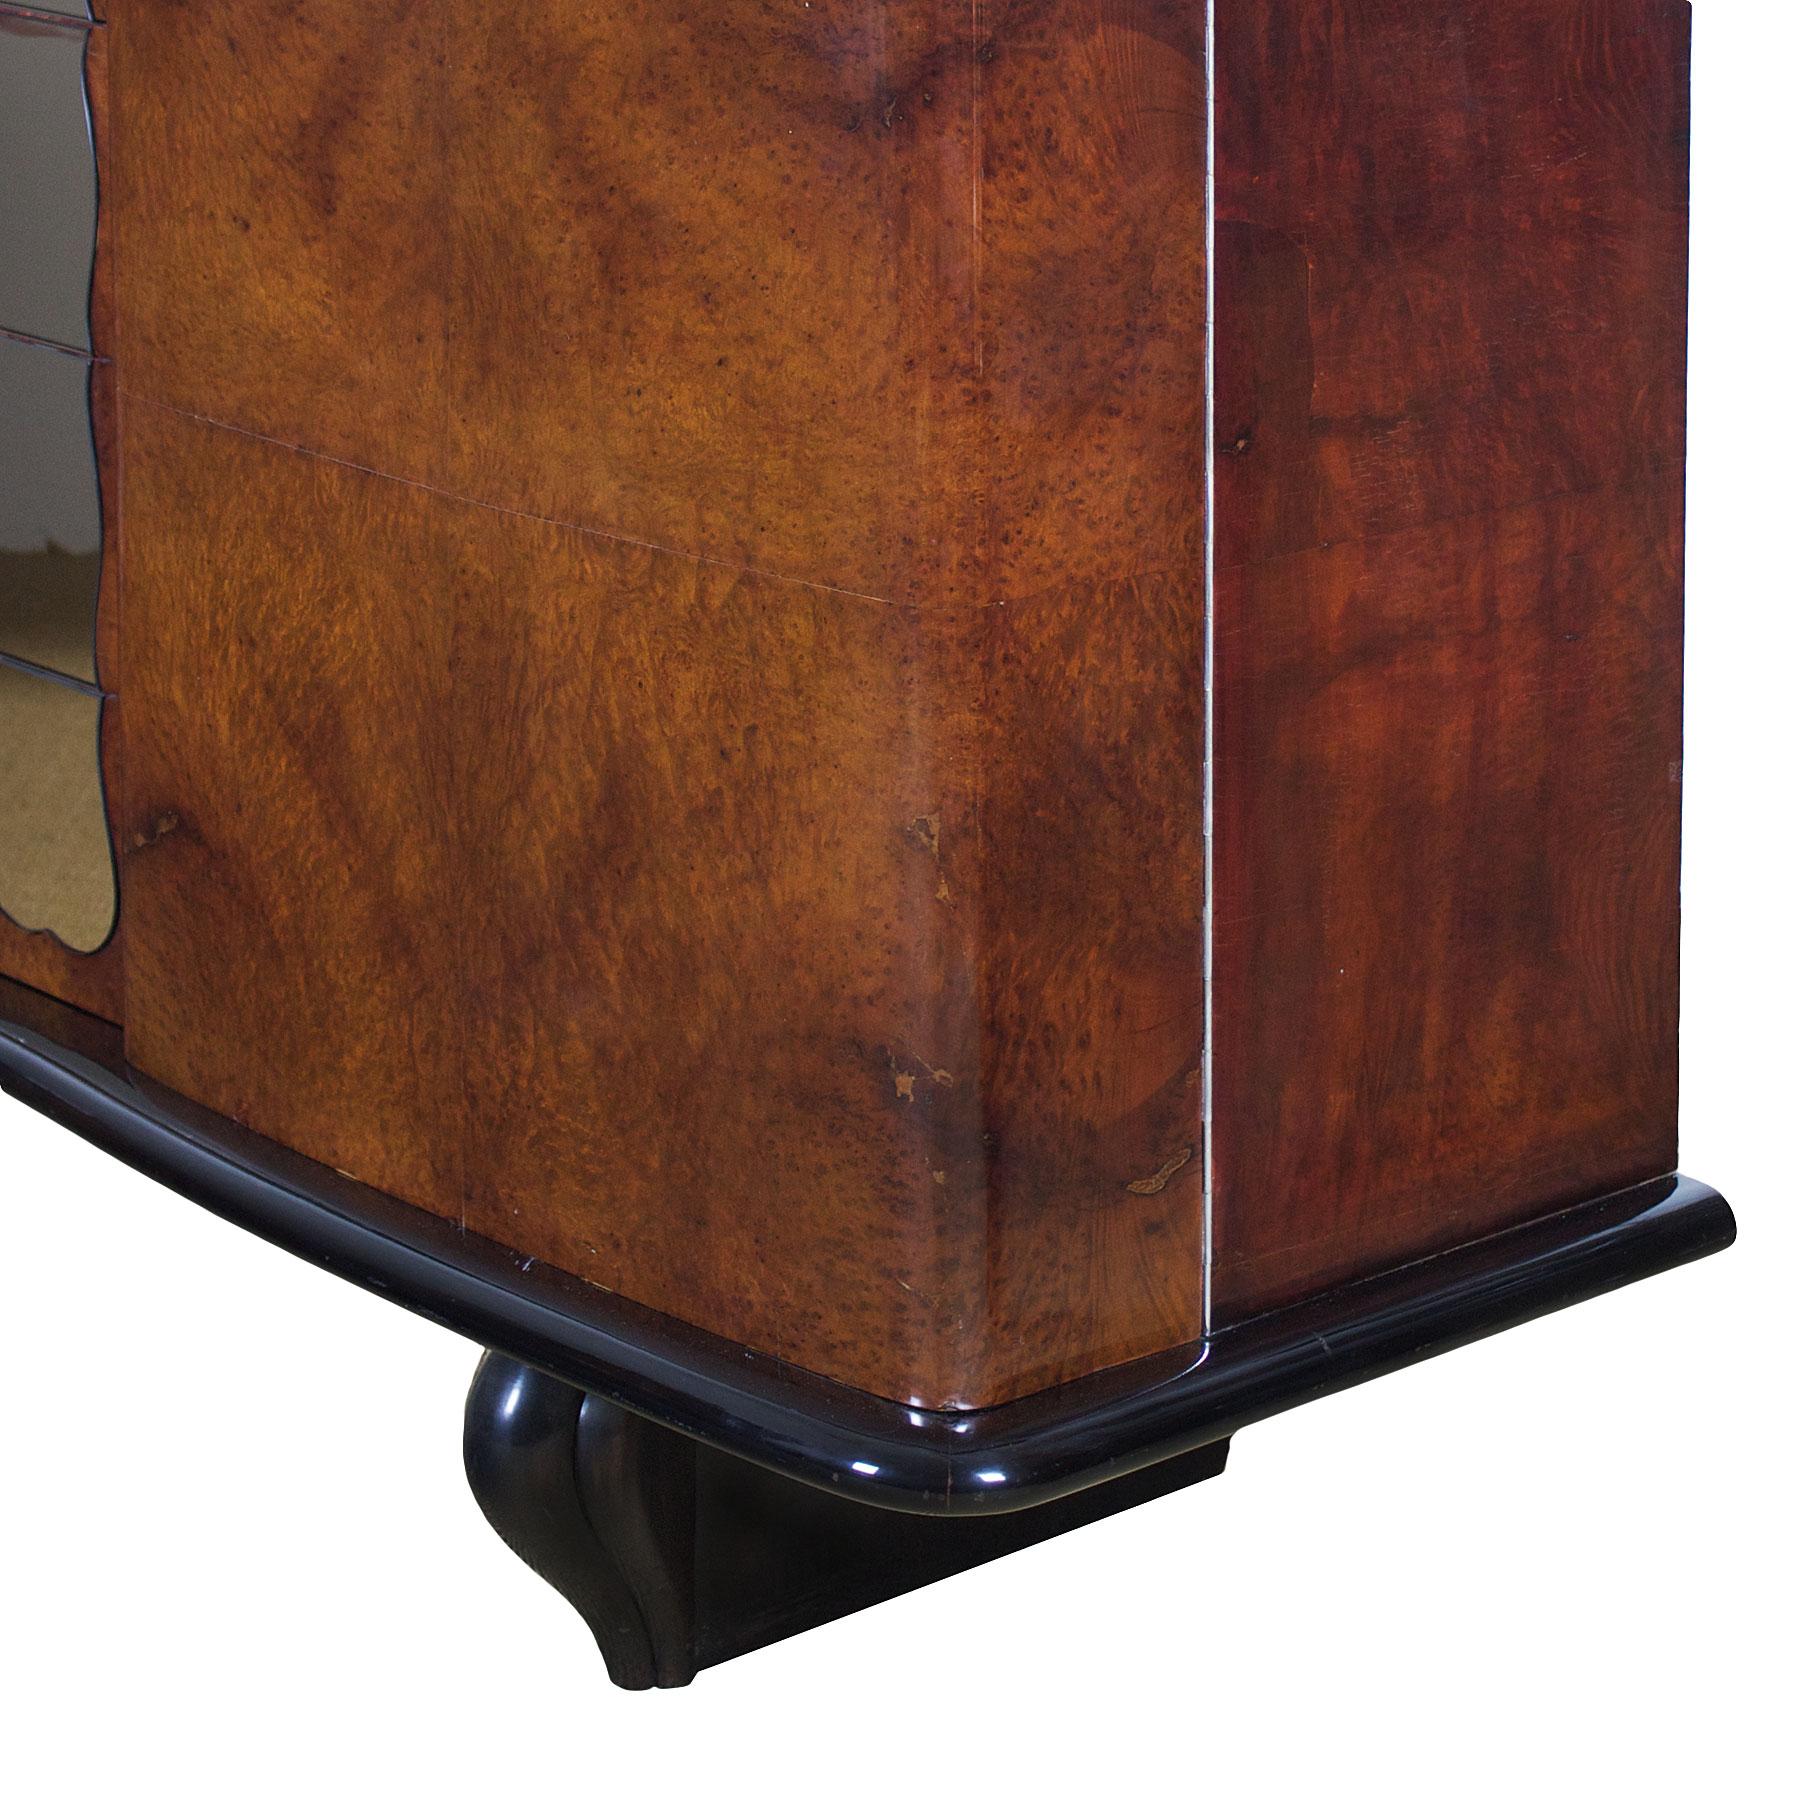 Wood 1930s Art Deco Two Doors and Four Drawers Sideboard, Thuya Burl, Mirror - Italy For Sale